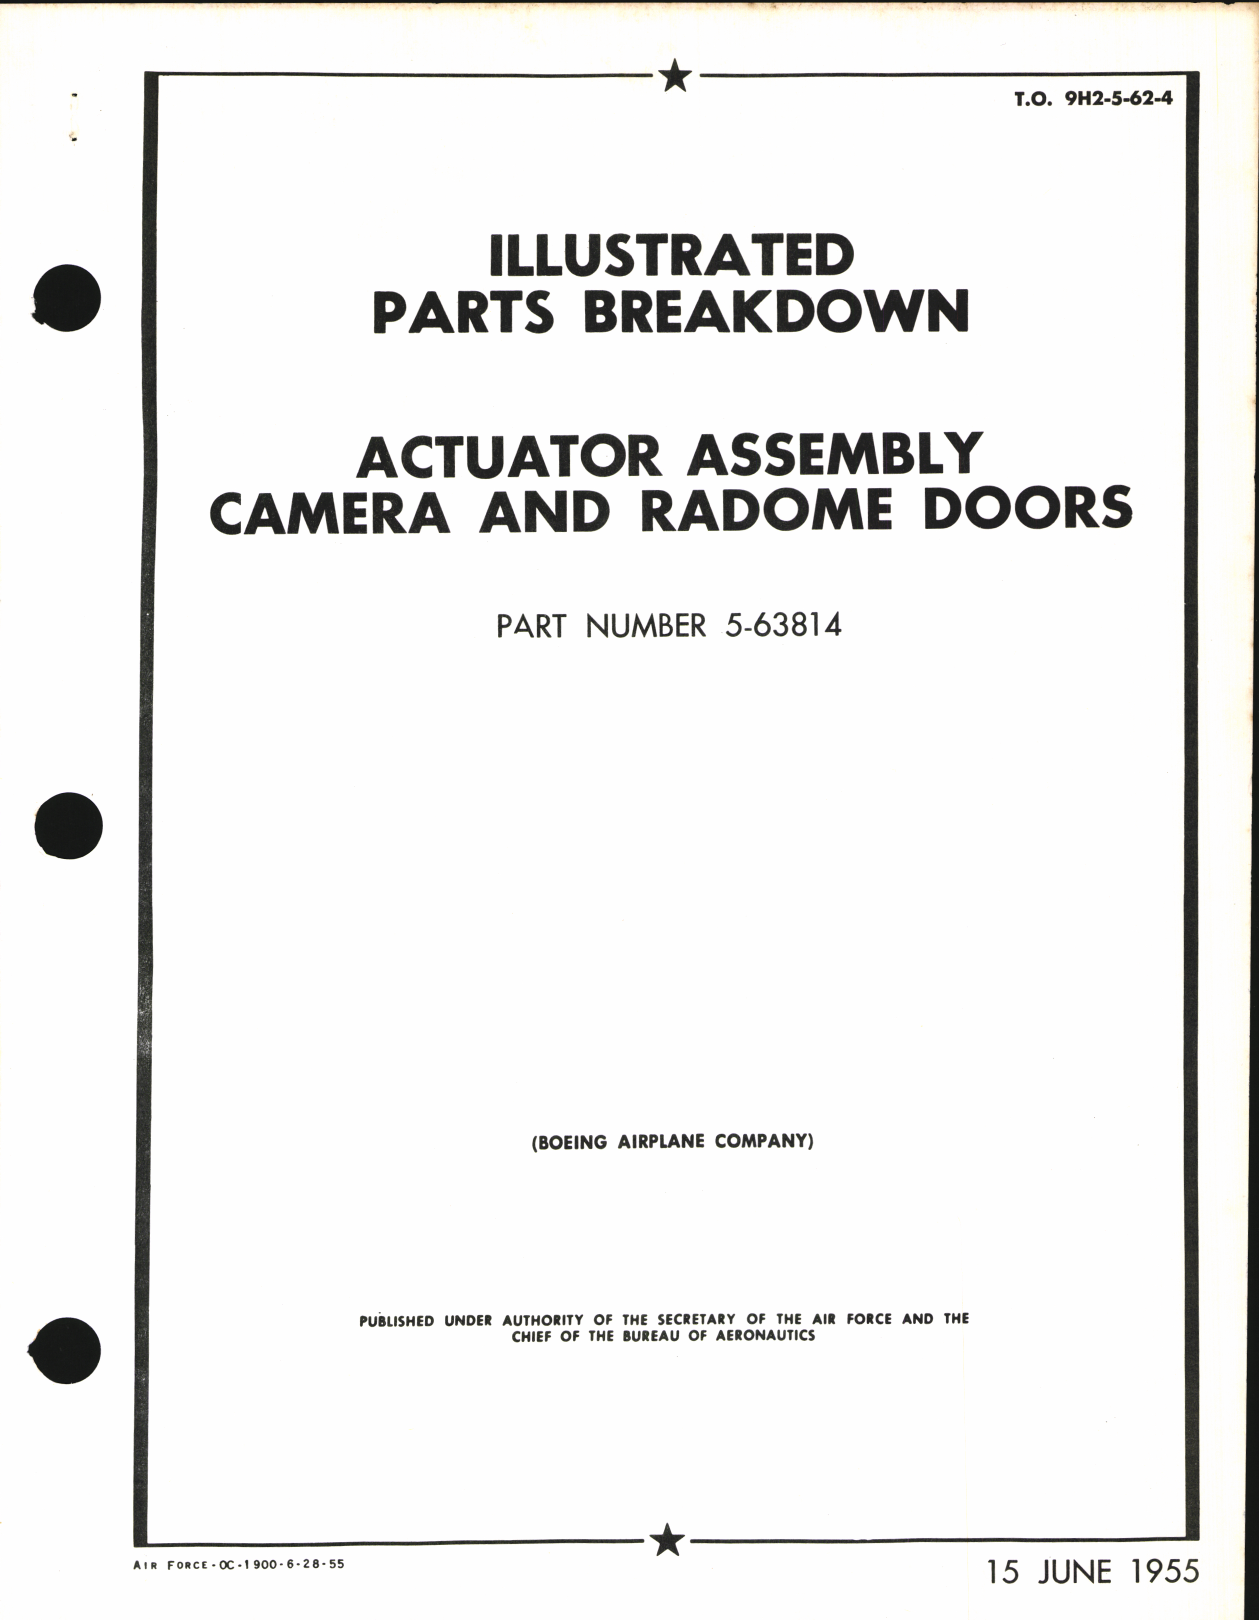 Sample page 1 from AirCorps Library document: Illustrated Parts Breakdown for Actuator Assembly Camera and Radome Doors Part No. 5-63814